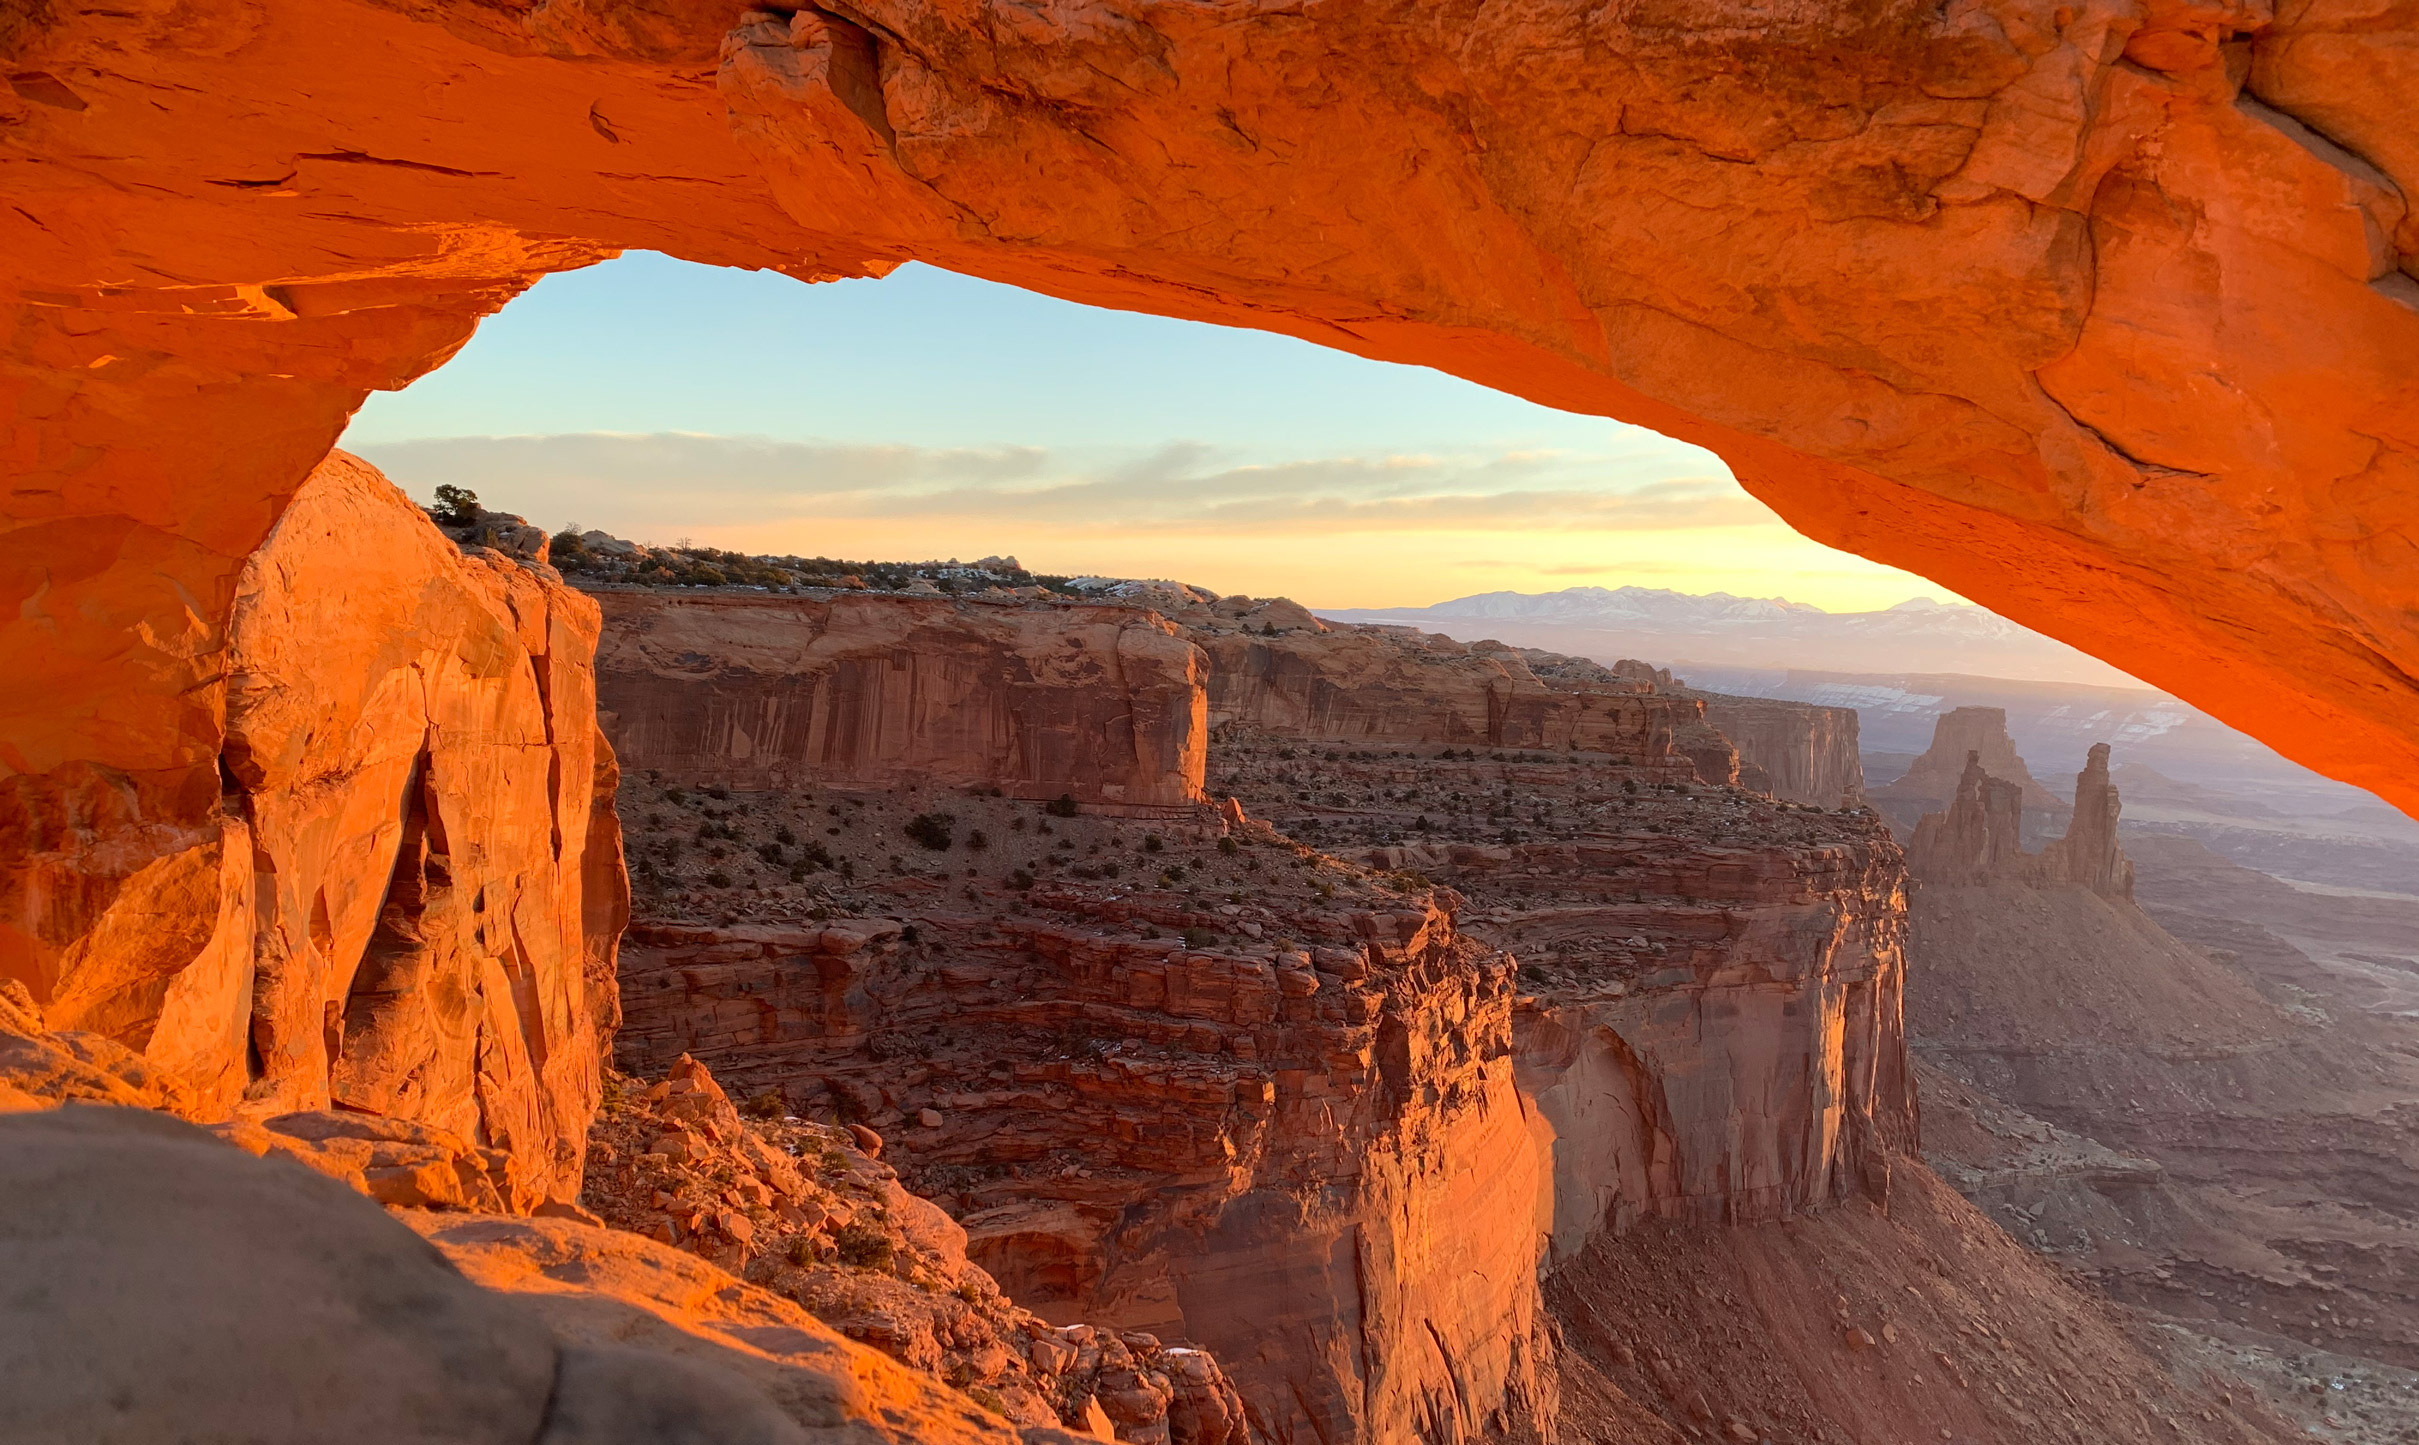 view of the stone arches overlooking a canyon at sunset